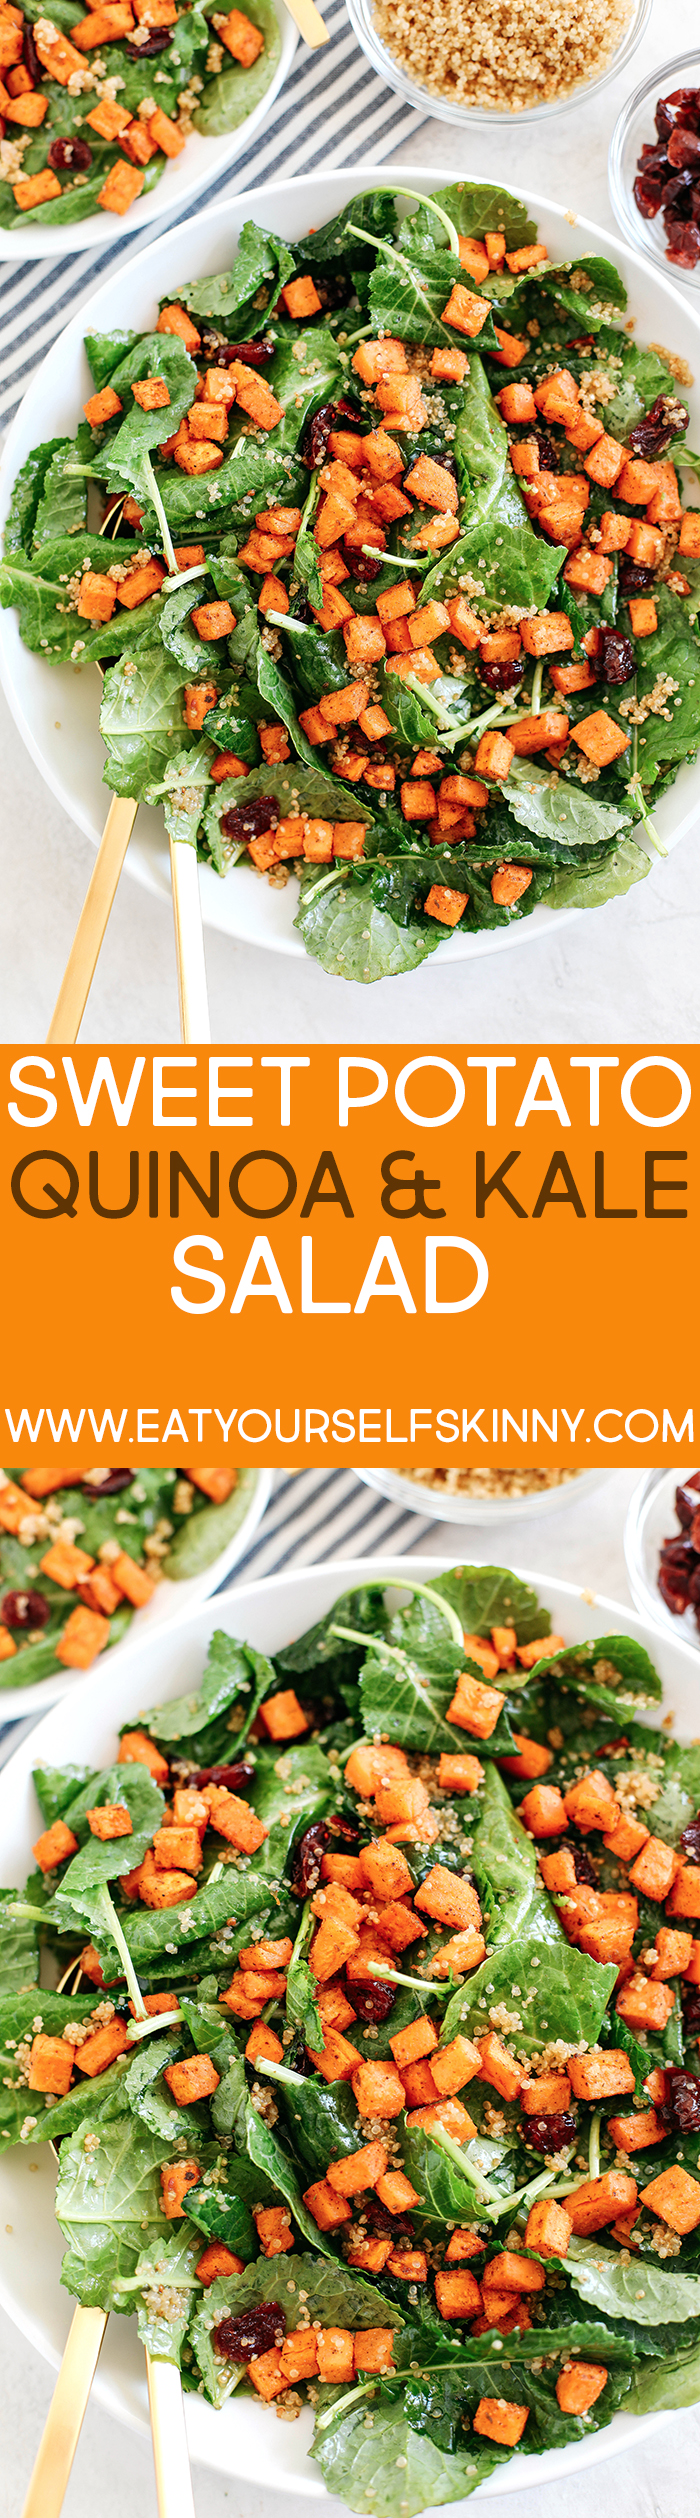 This Roasted Sweet Potato, Quinoa and Kale Salad has all of my favorite ingredients in ONE single dish!  Perfect for lunches or an easy weeknight dinner! 